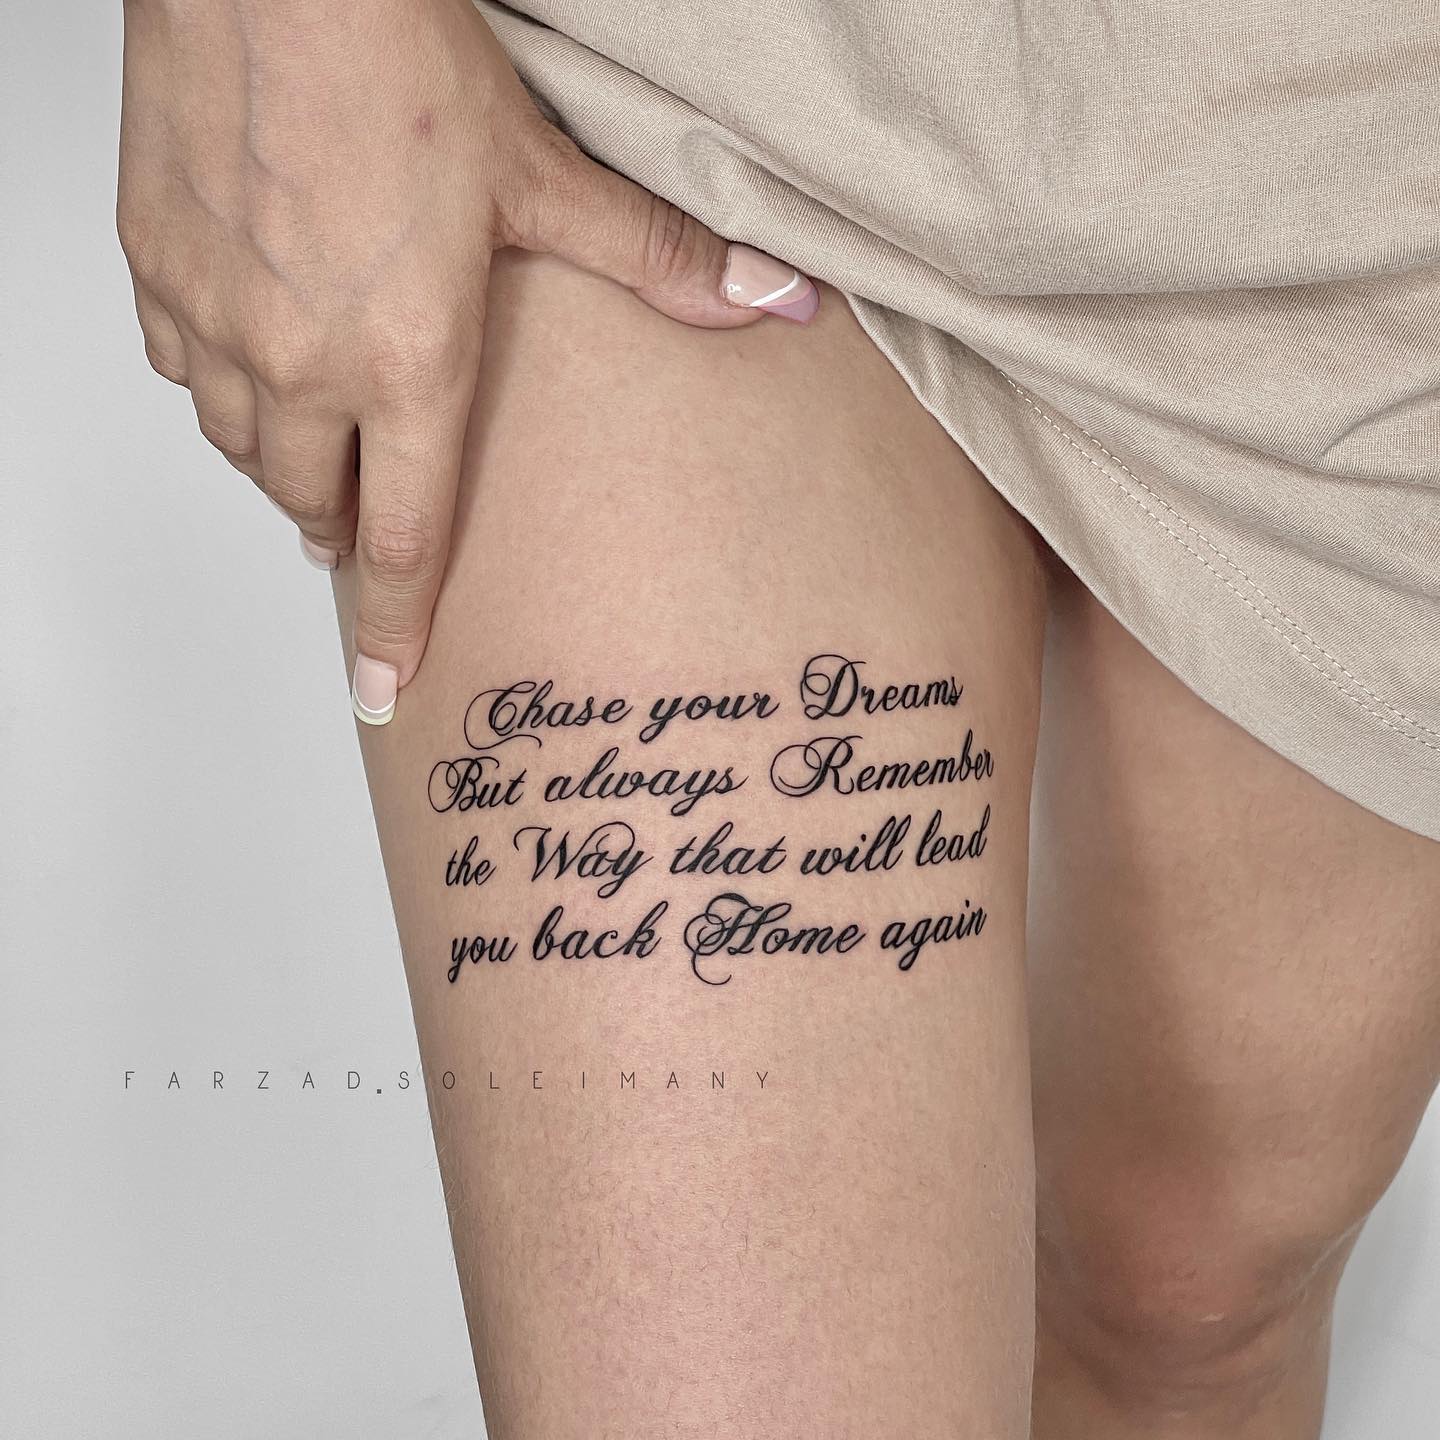 56 Delightful Expression Tattoos Ideas and Design For Thigh - Psycho Tats